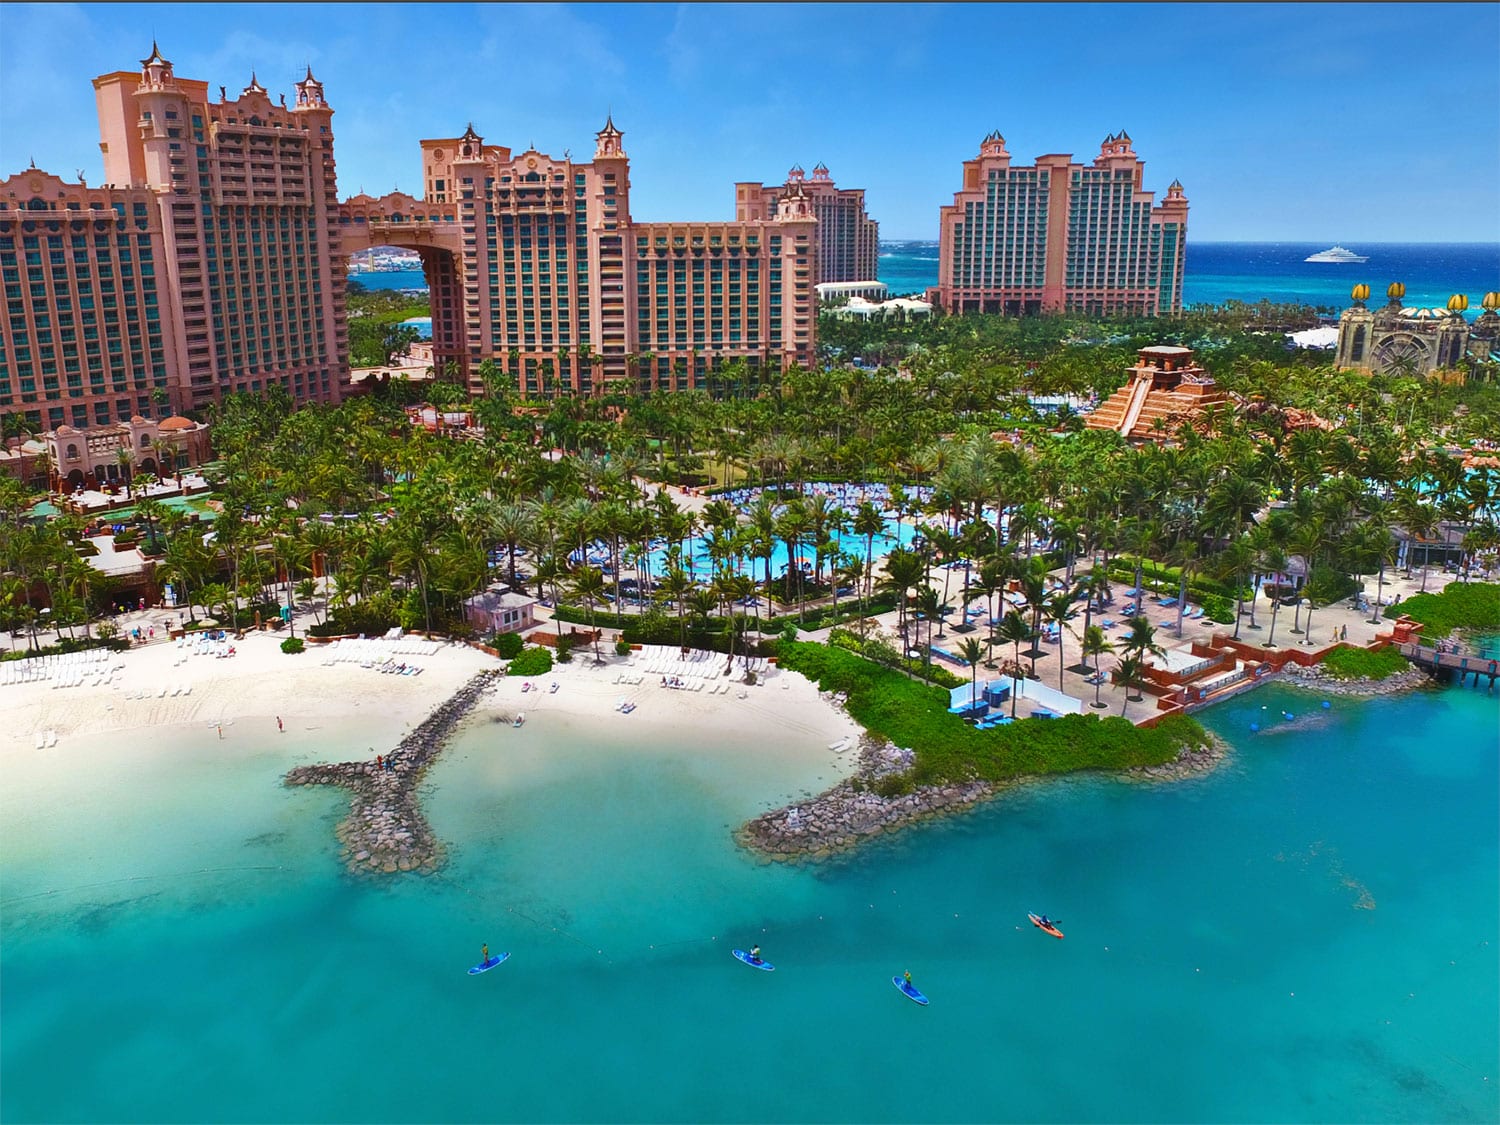 An exterior aerial view of the Atlantis Paradise Island resort in the Bahamas.